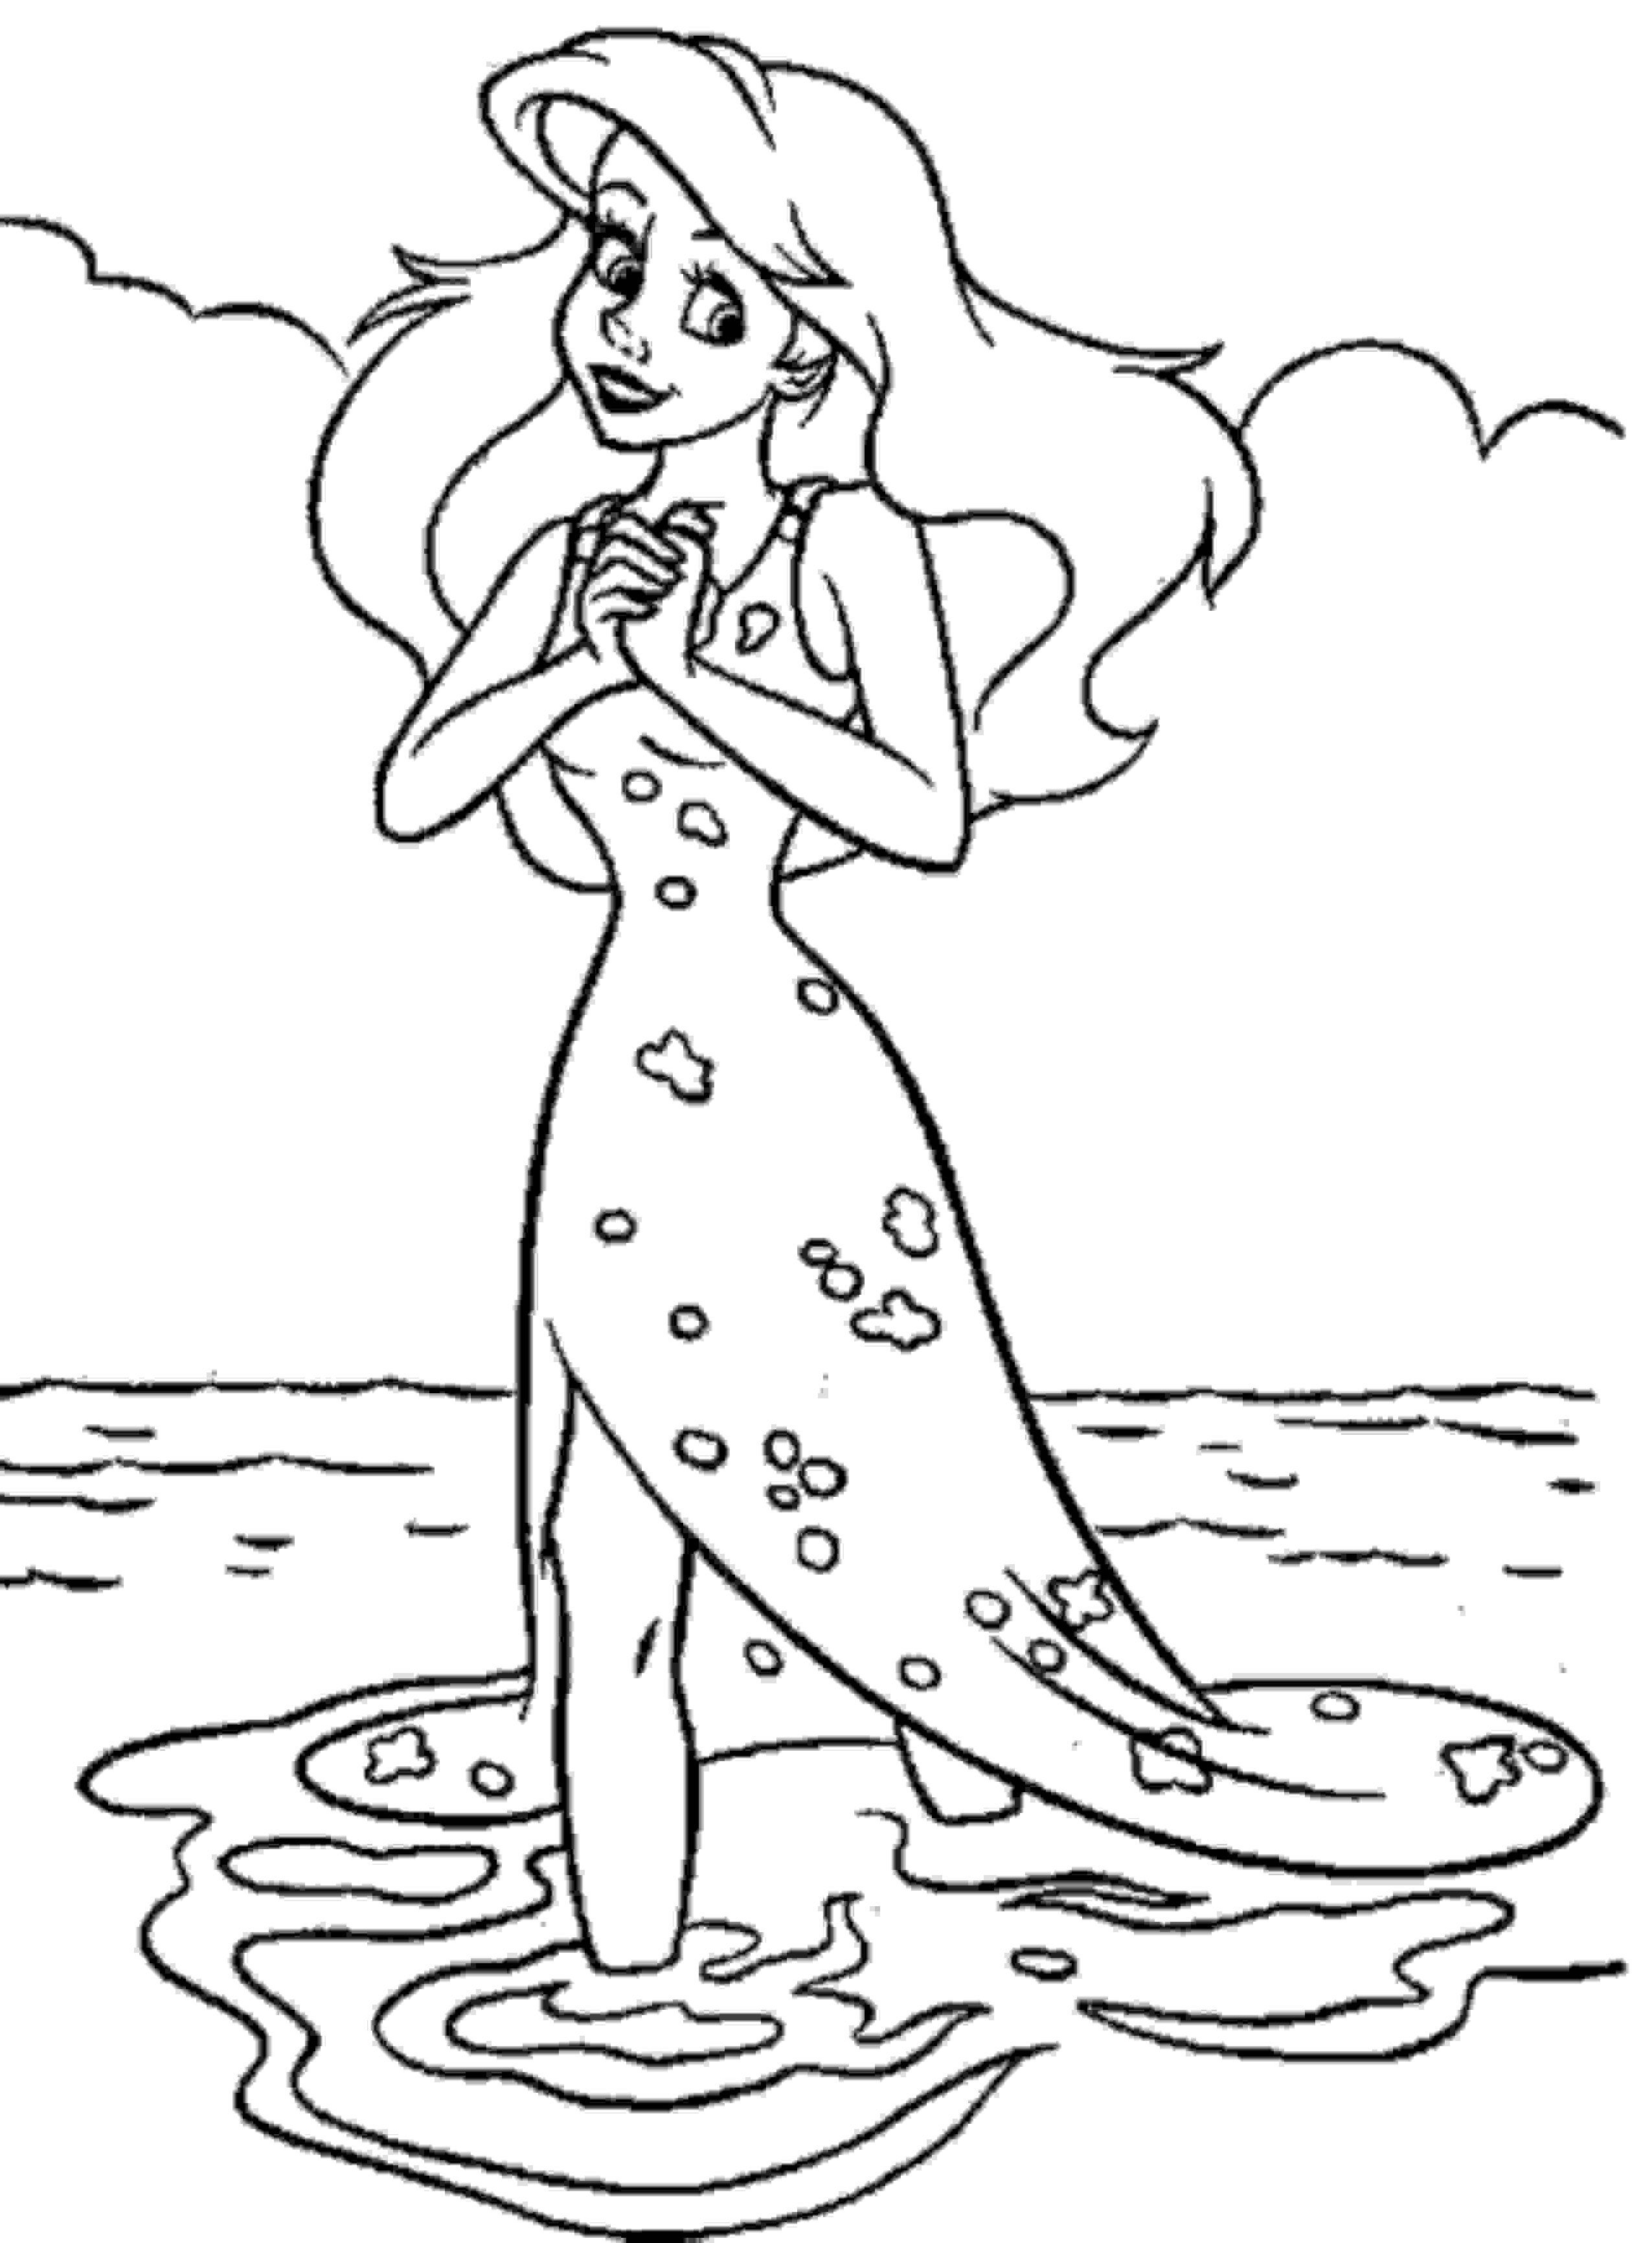 Excellent photo of ariel coloring page